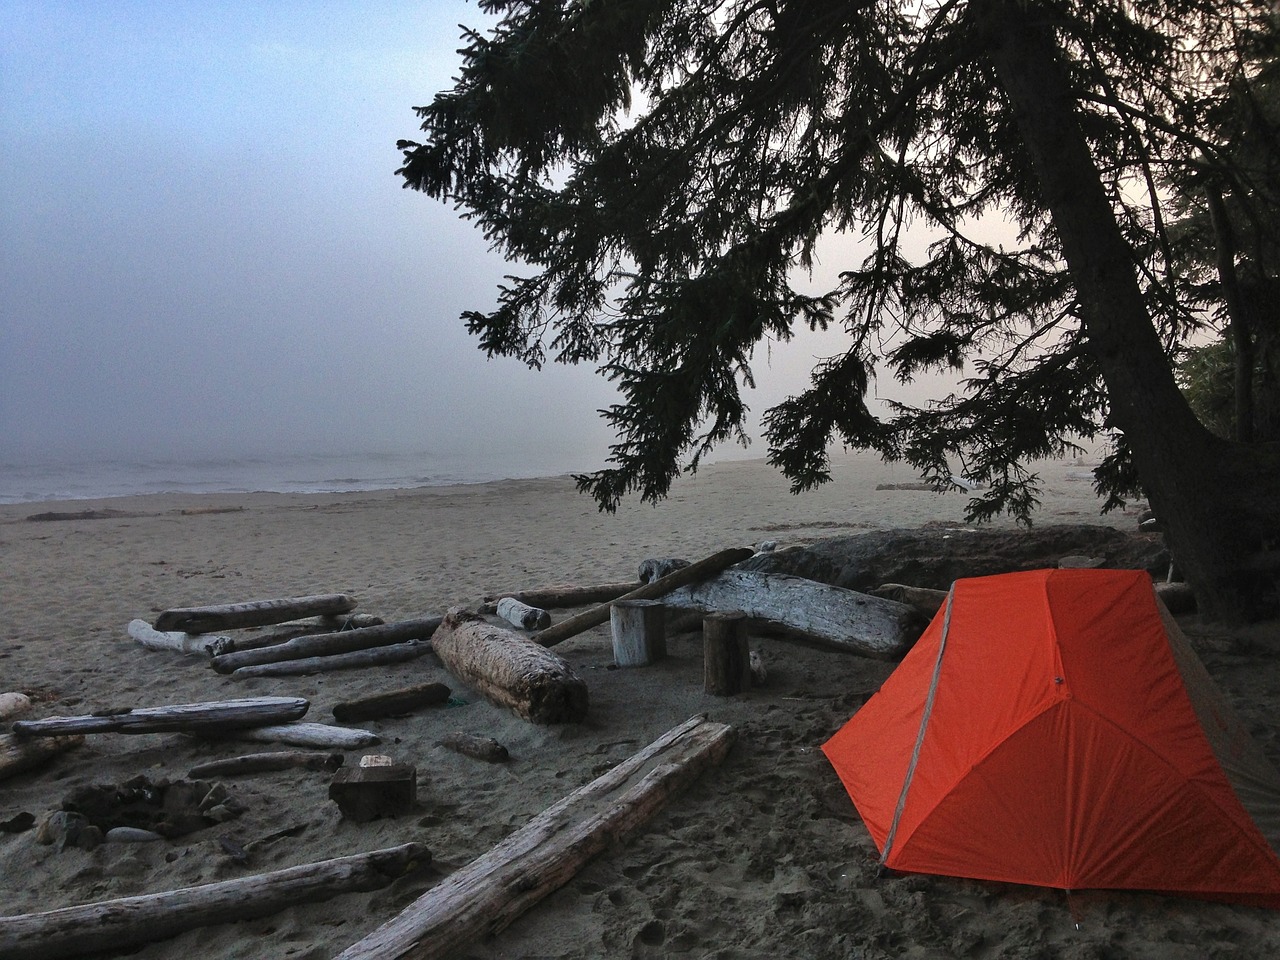 an orange tent, a tree, and scattered logs on a beach by the water